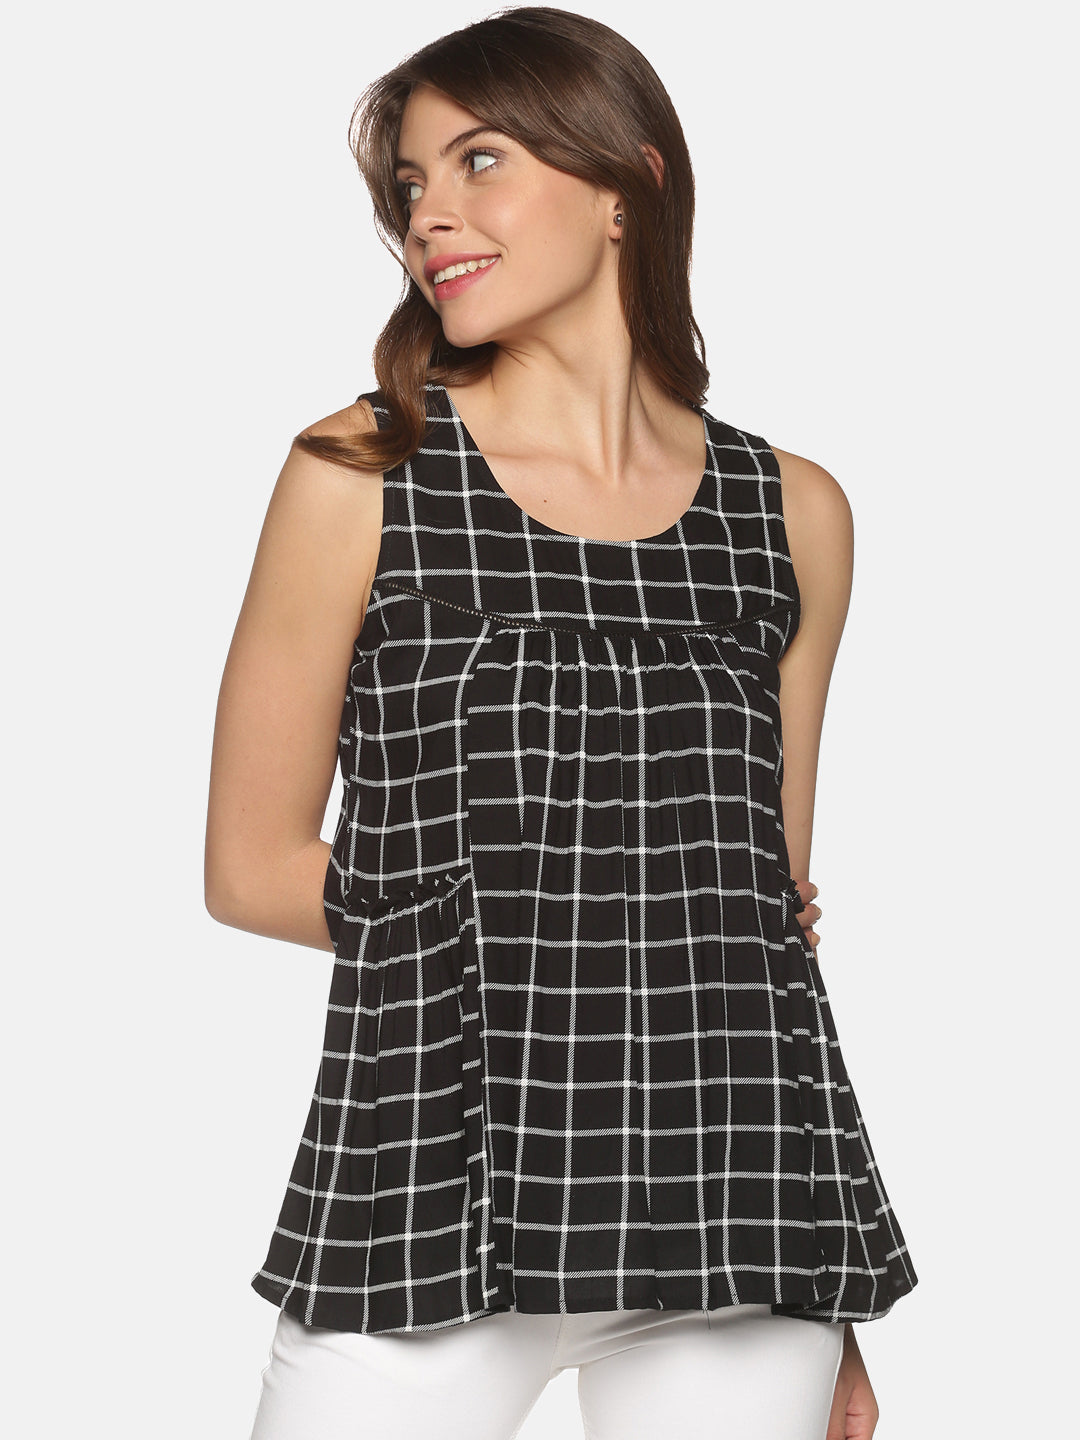 Black Checks Panelled Top with Gathers & Lace Insert on Front Yoke